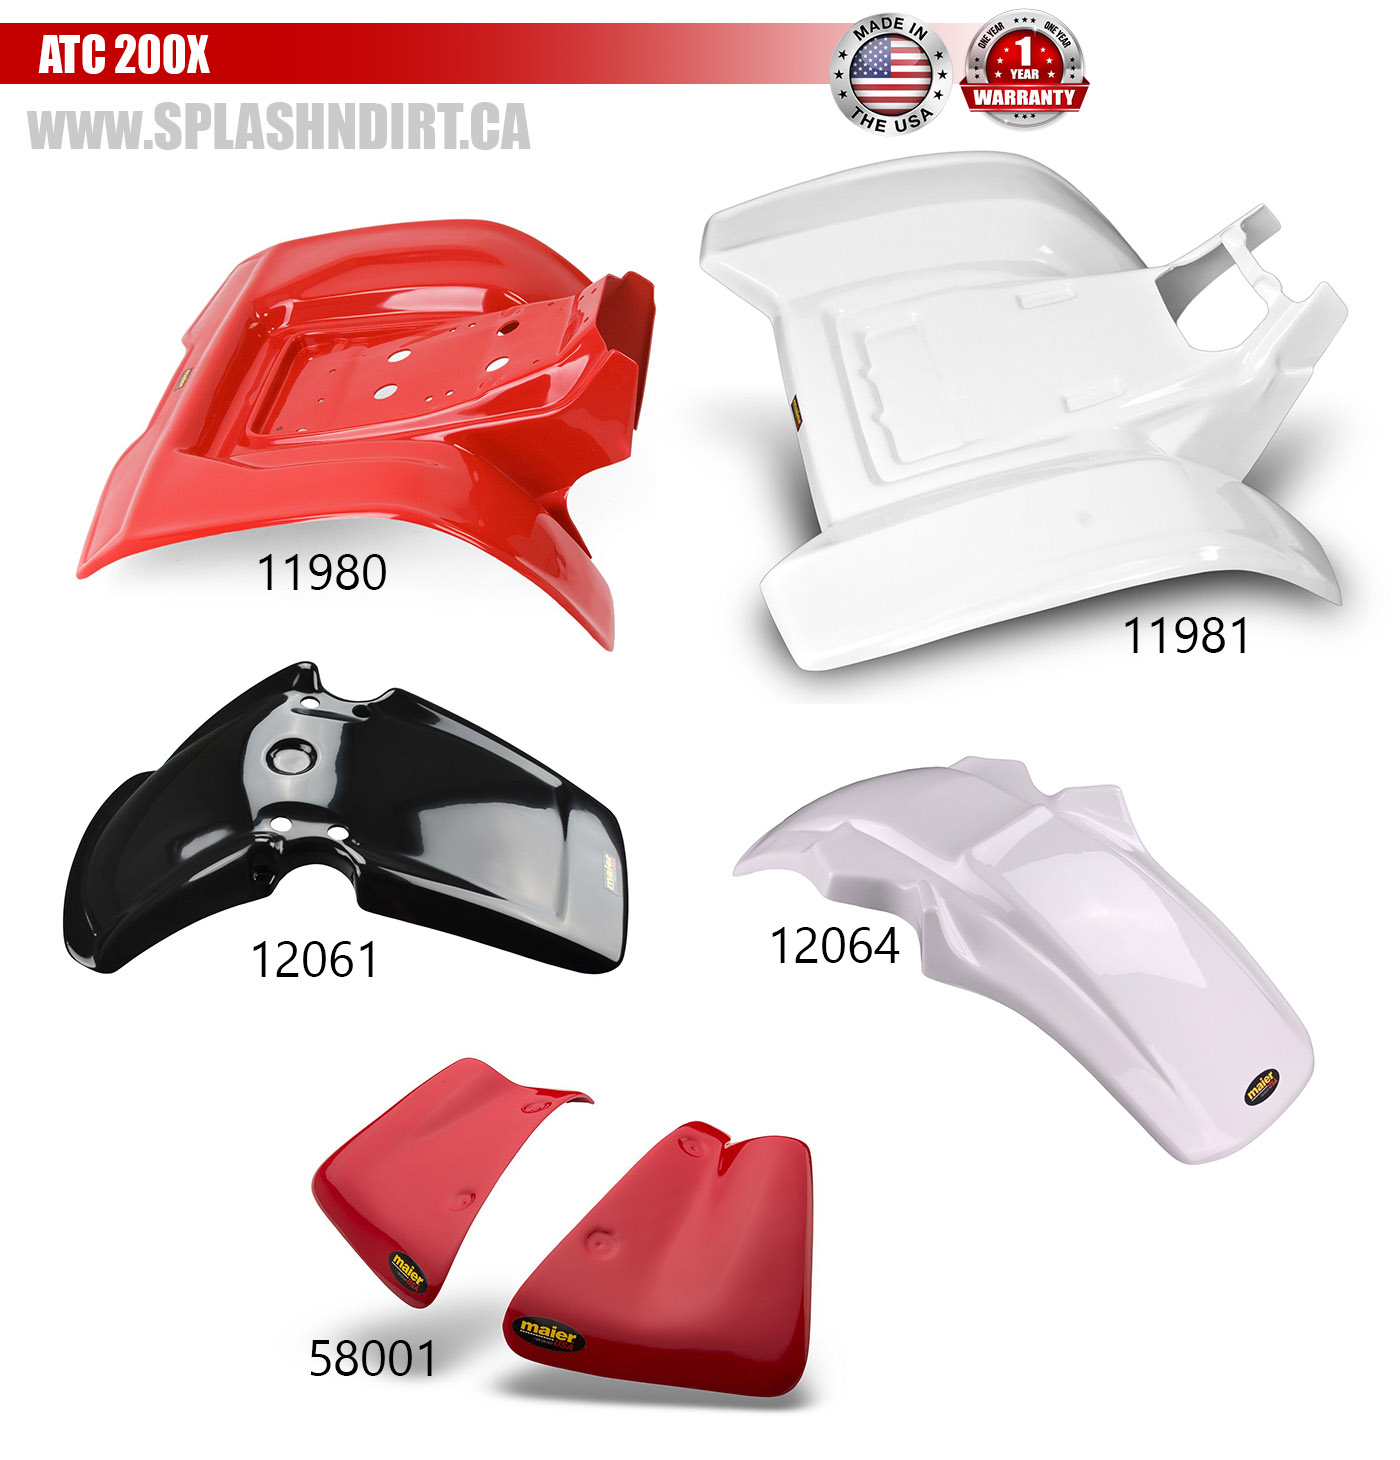 Maier Replacement Front And Rear Fender For Honda Atc 200X | Splash'n Dirt  Distribution Canada